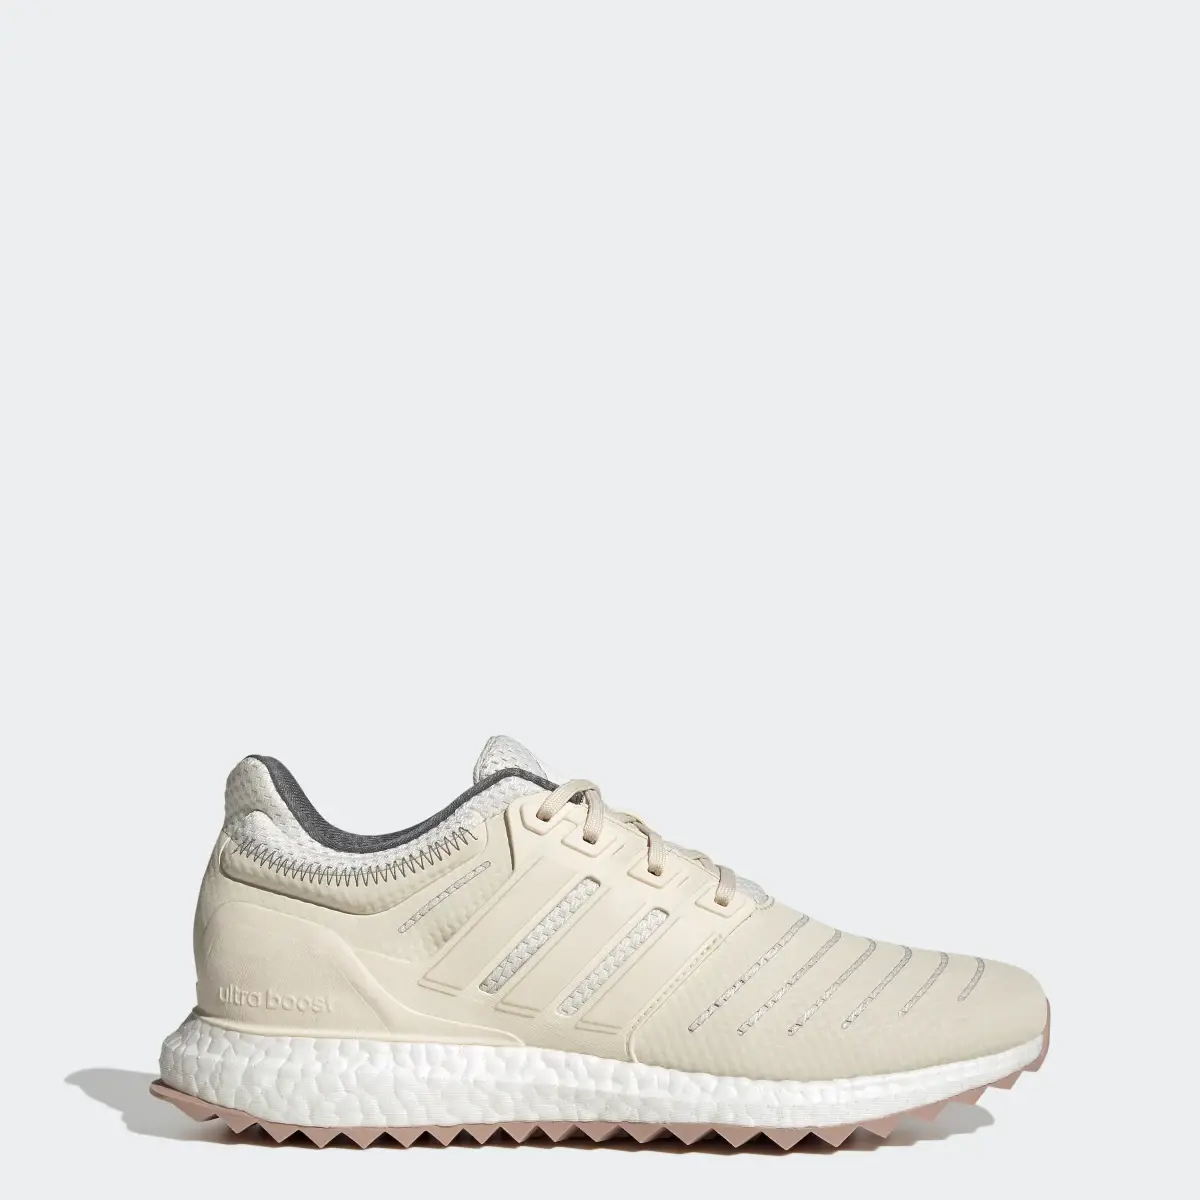 Adidas Chaussure Ultraboost DNA XXII Lifestyle Running Sportswear Capsule Collection. 1